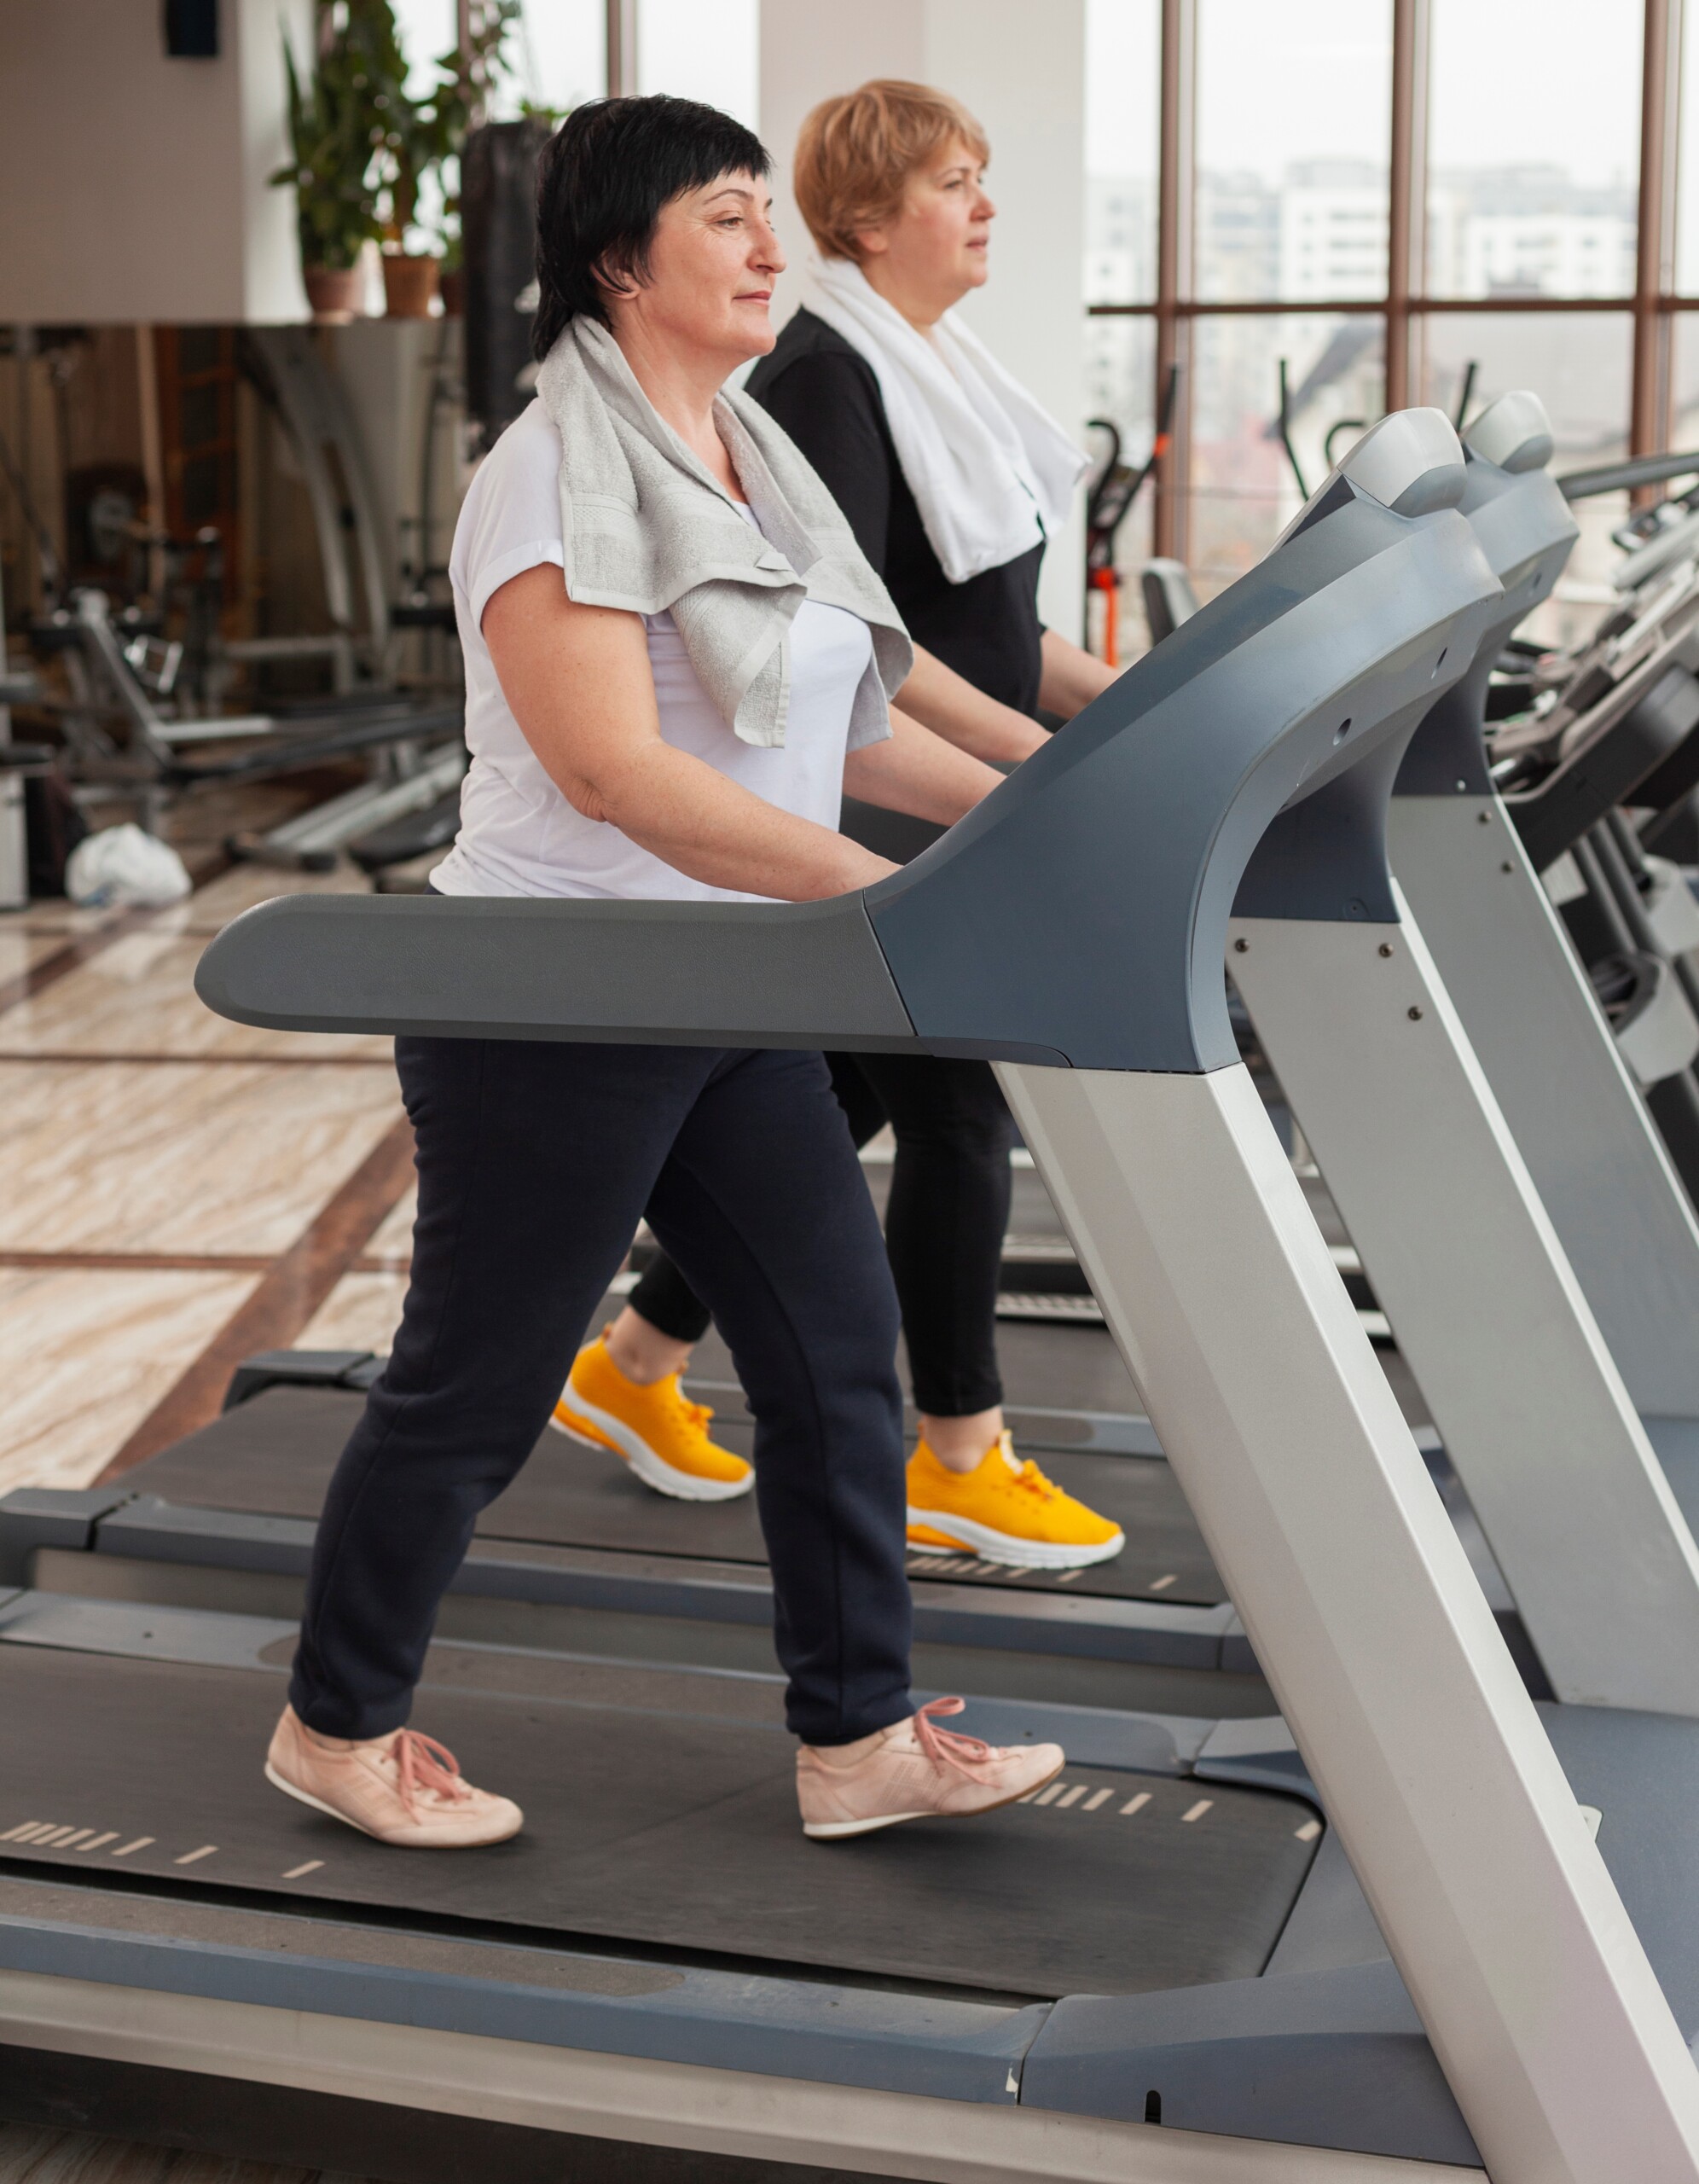 10 Reasons Never to Hold onto the Treadmill